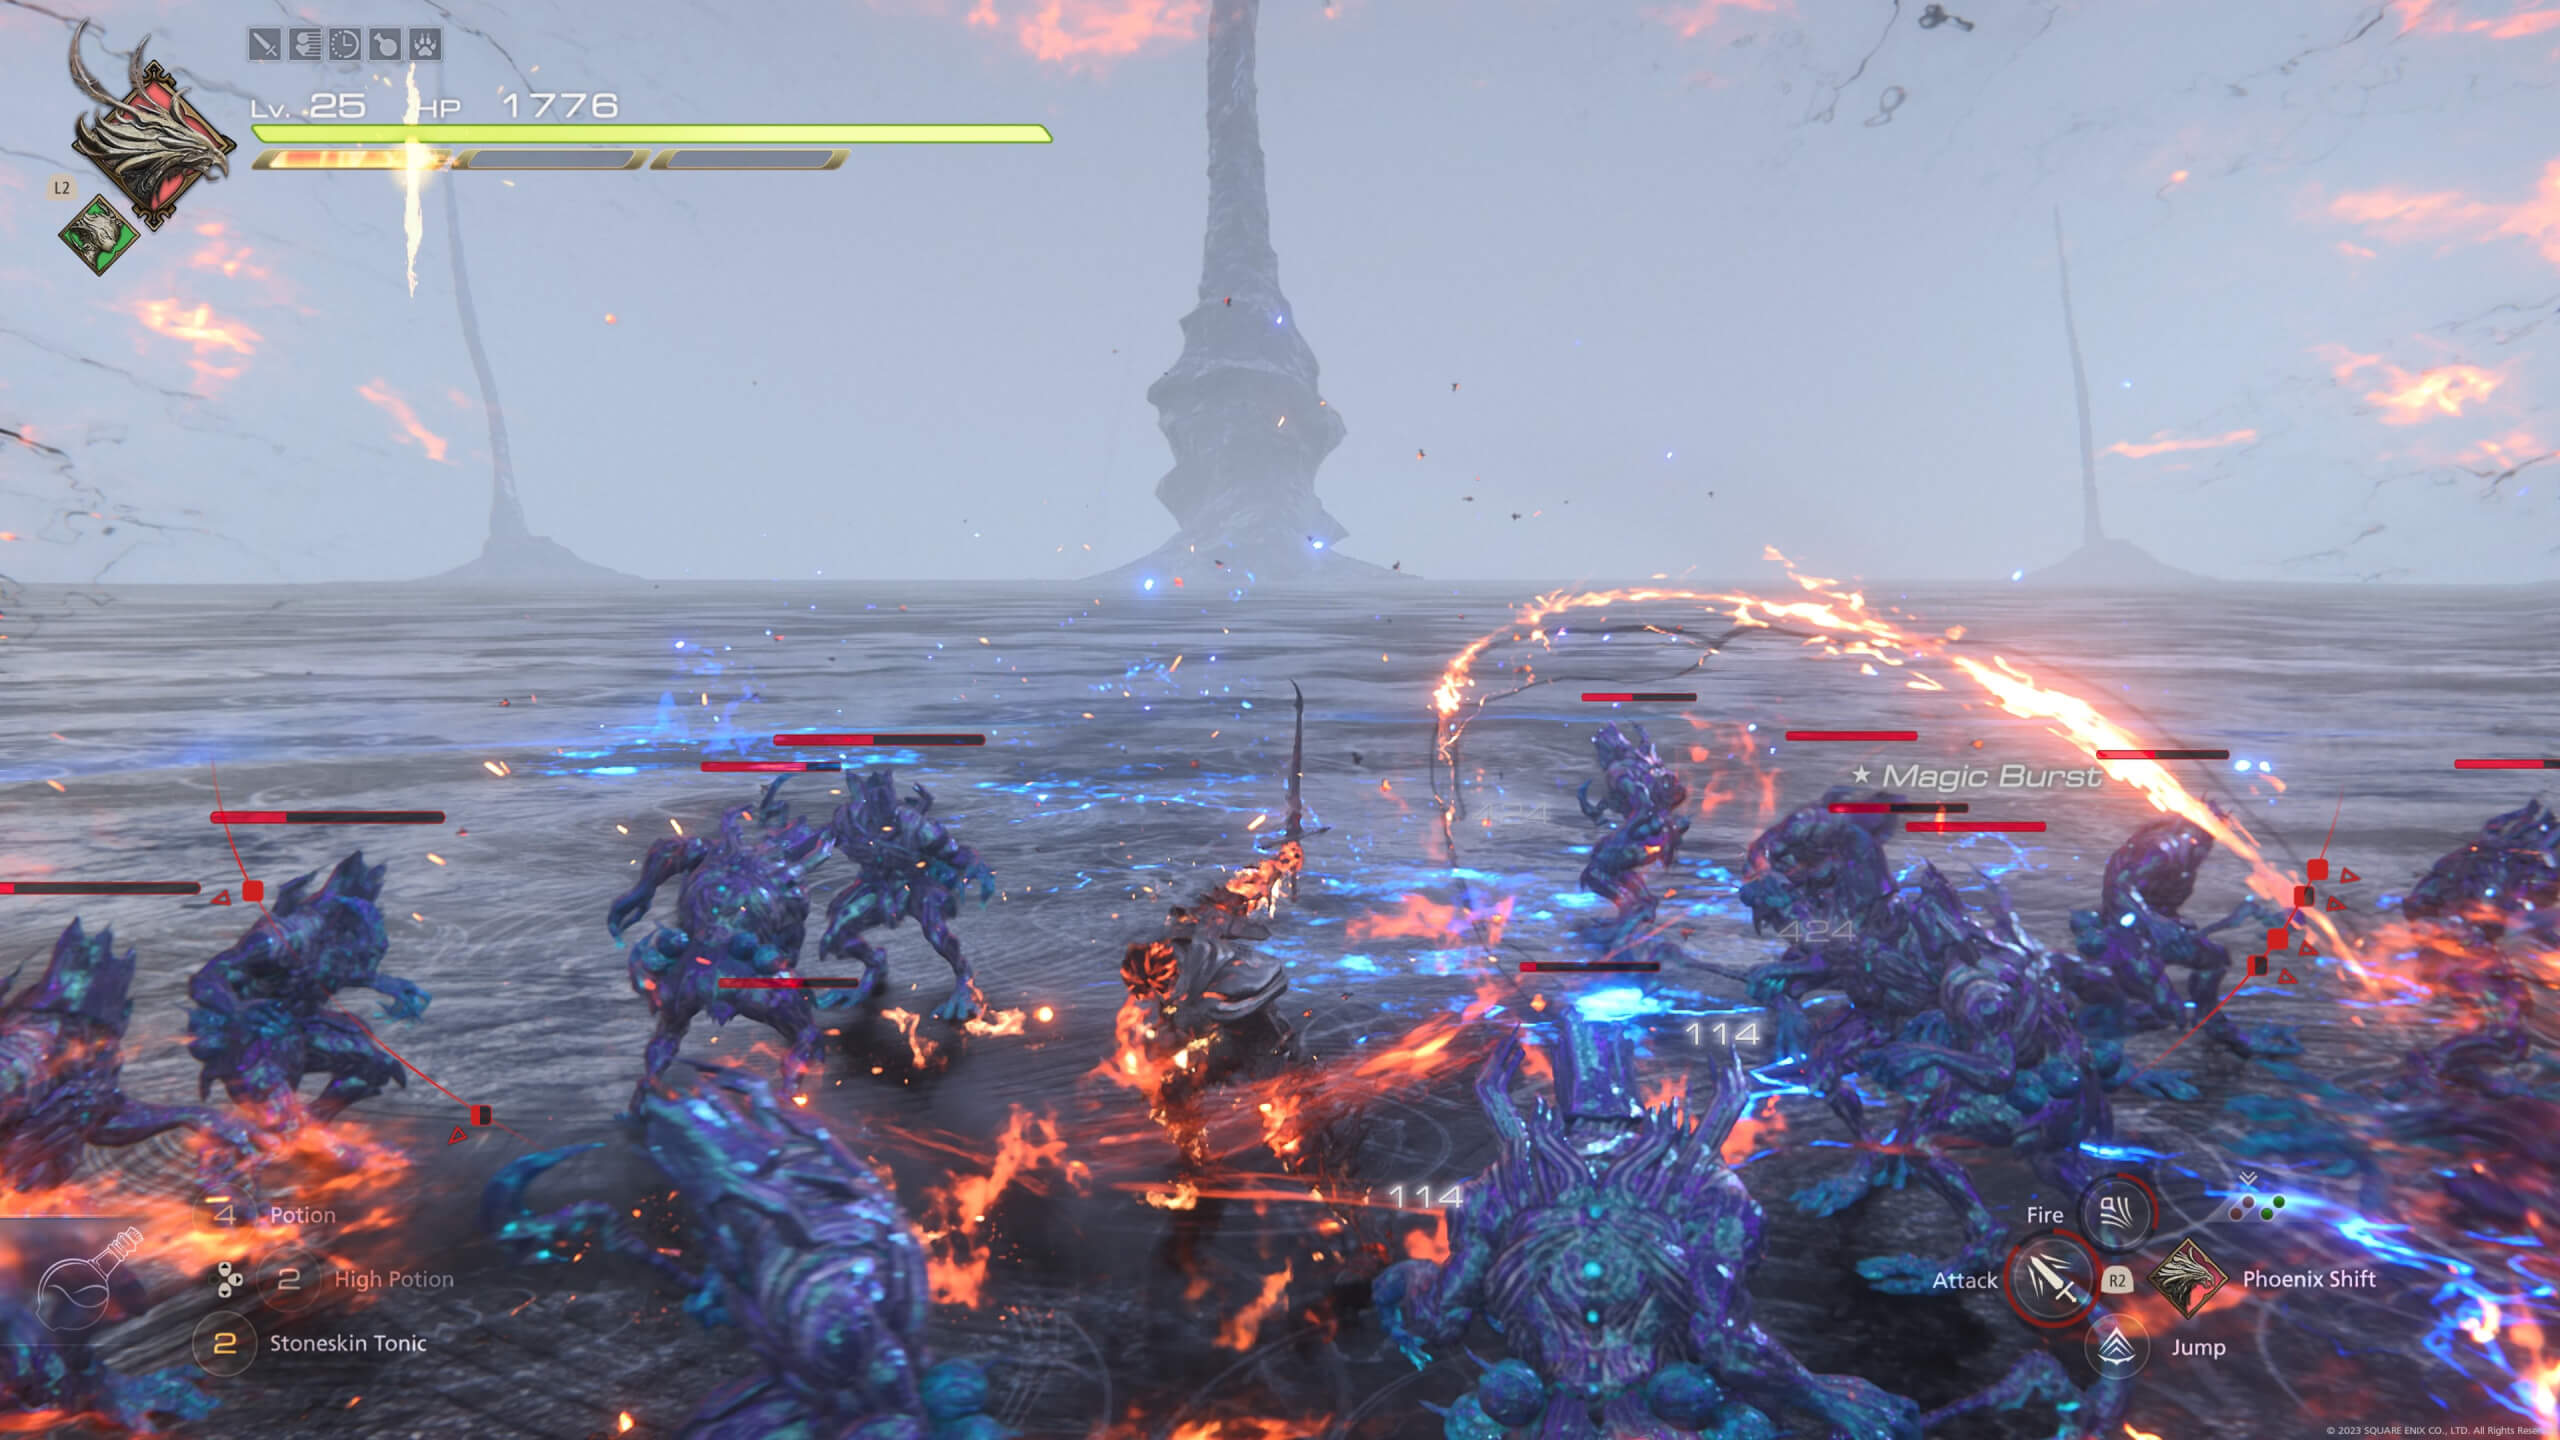 Though it is hard to see Clive is in his Limit Breaker form and is attacking a horde of enemies.